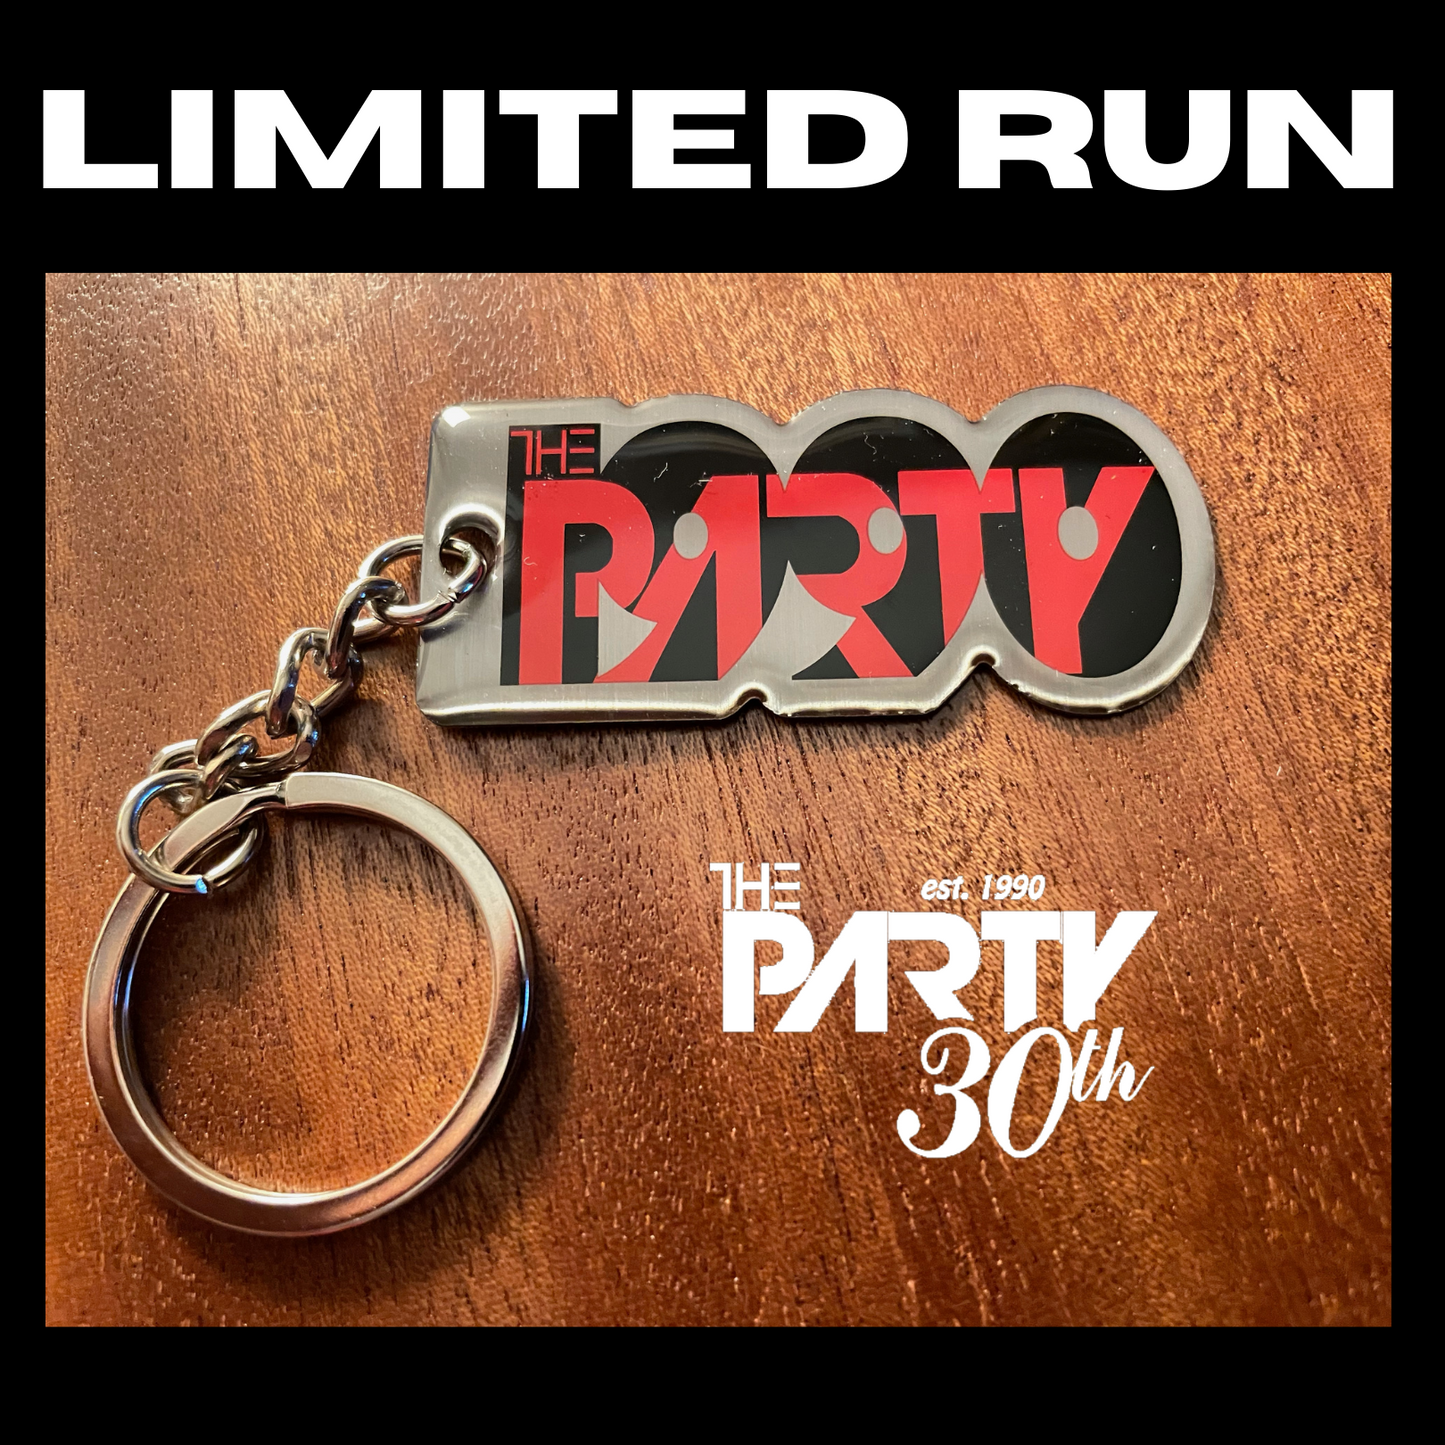 1990 Keychain (Celebrating The Party's Debut) - CLUB MEMBER DISCOUNT